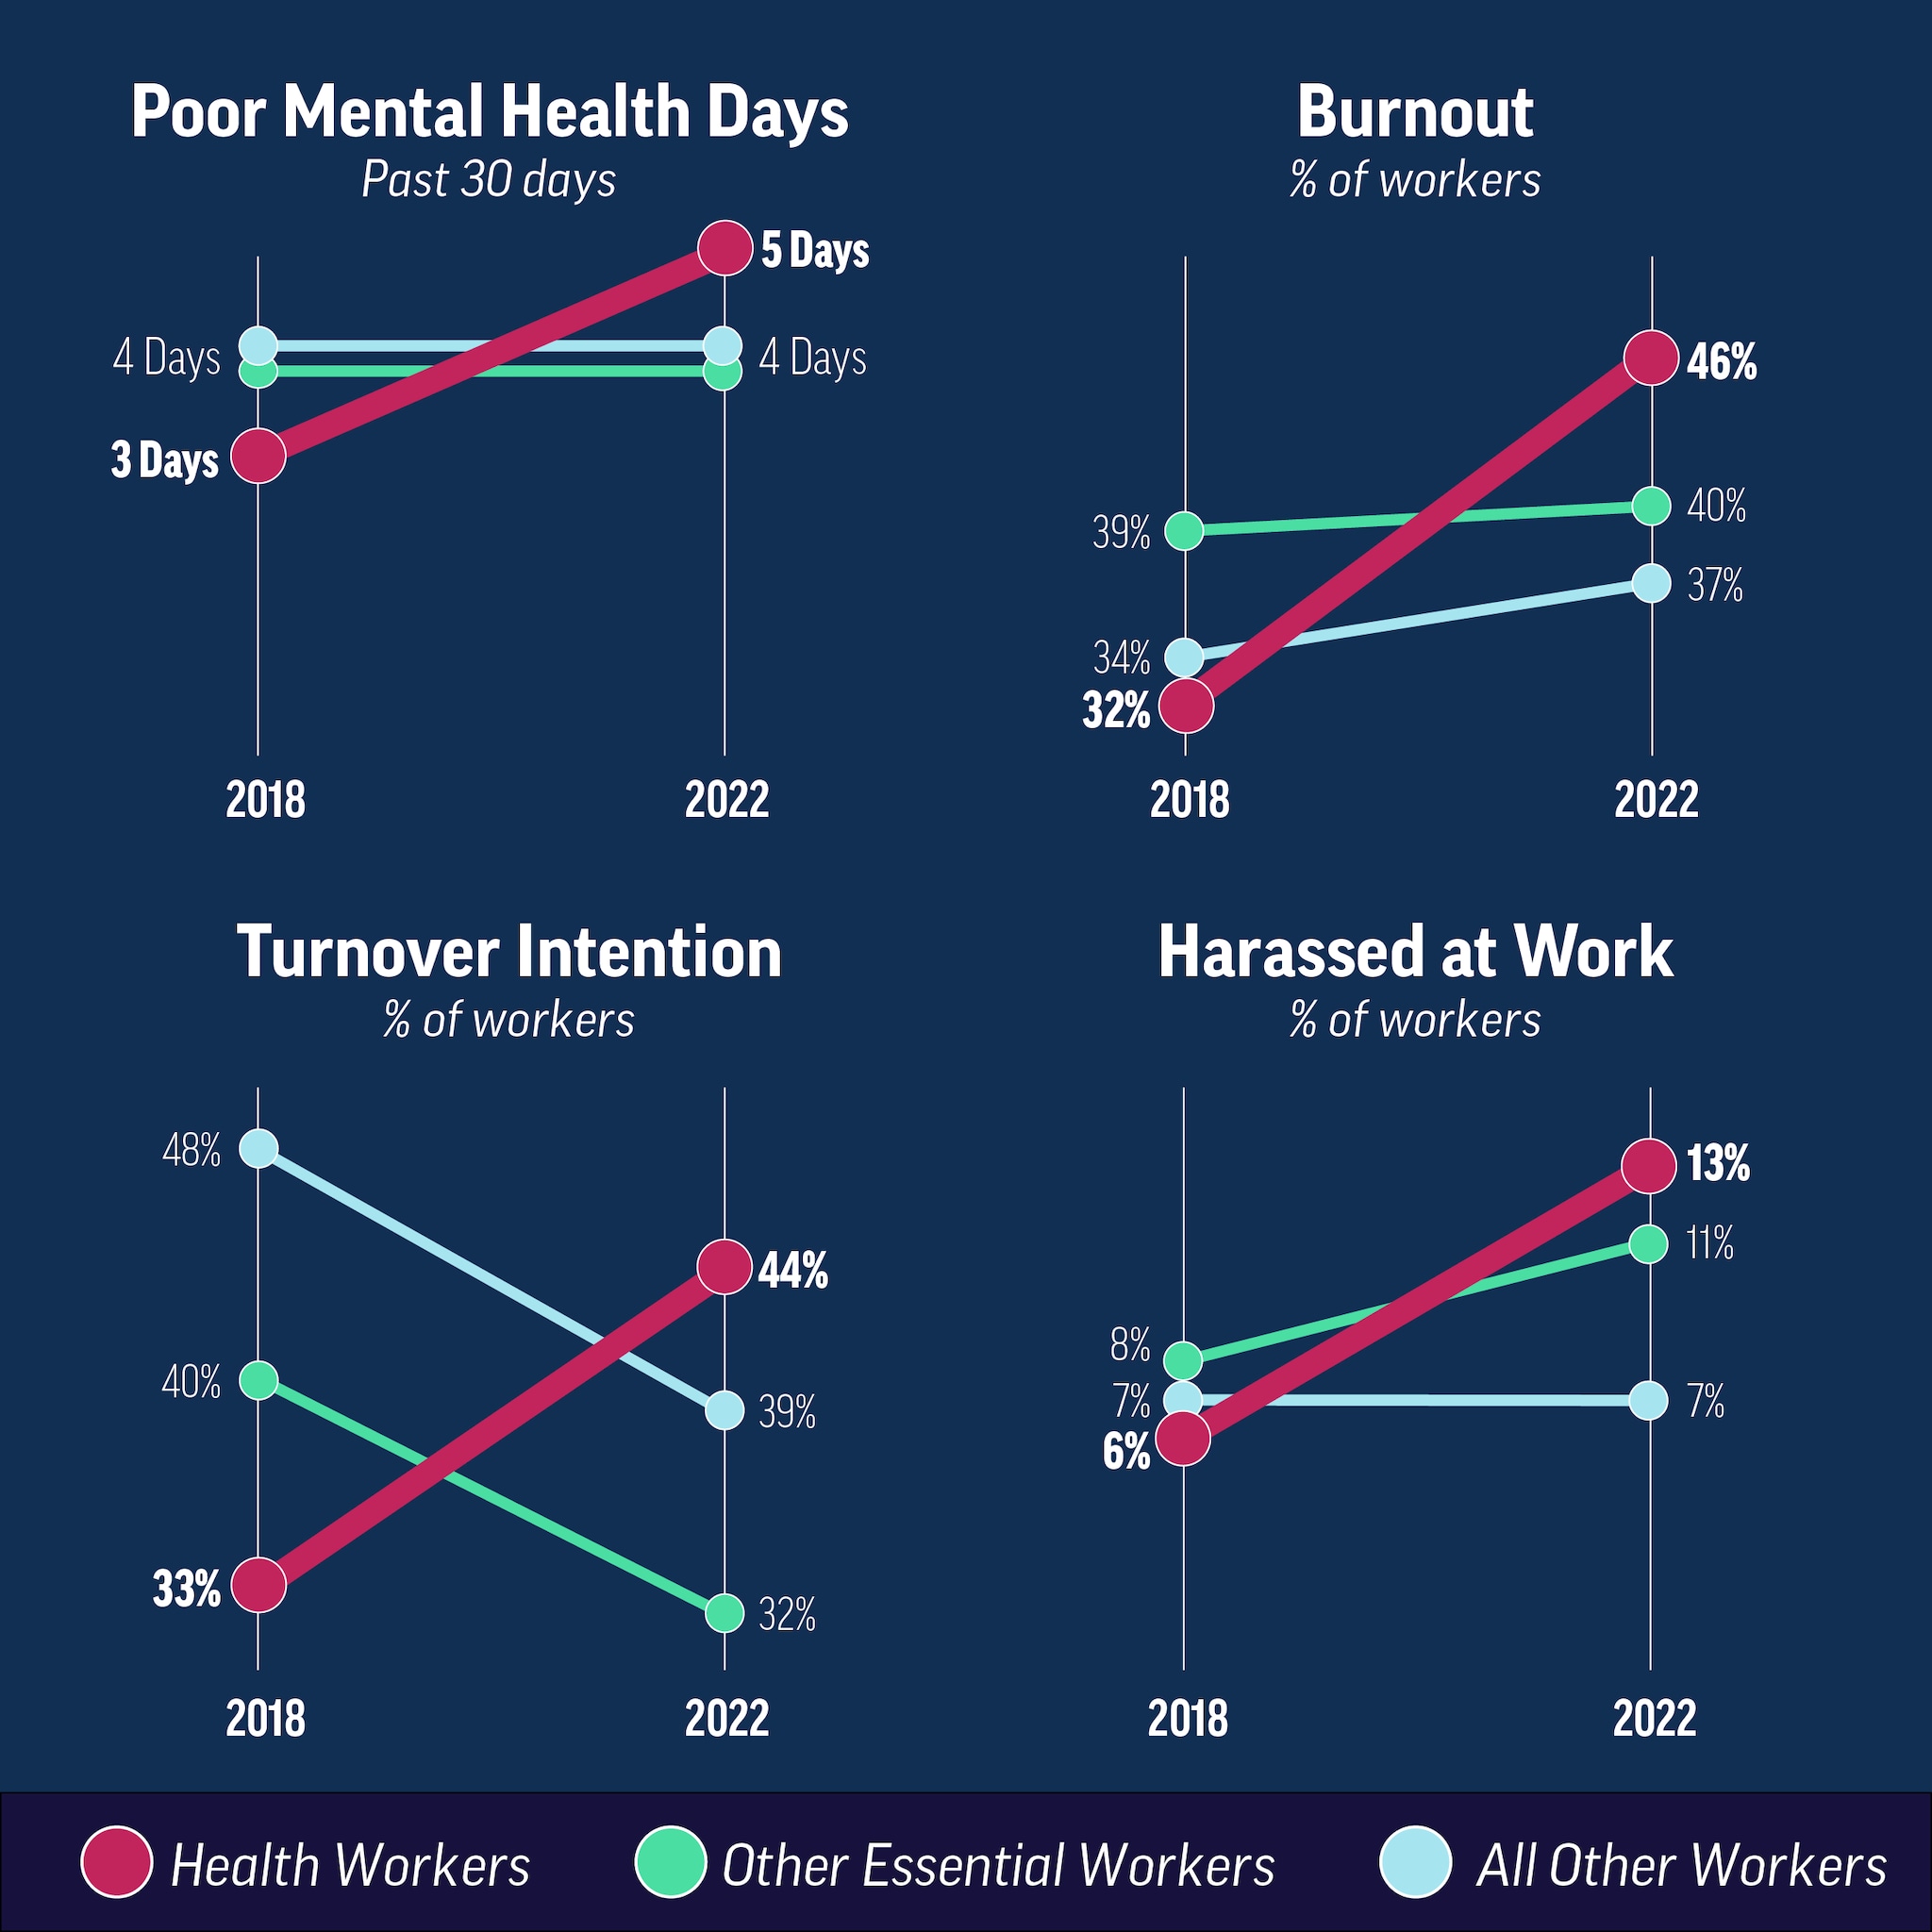 Infographic 1: Health Workers Had Worse Outcomes in 2022 Compared to 2018